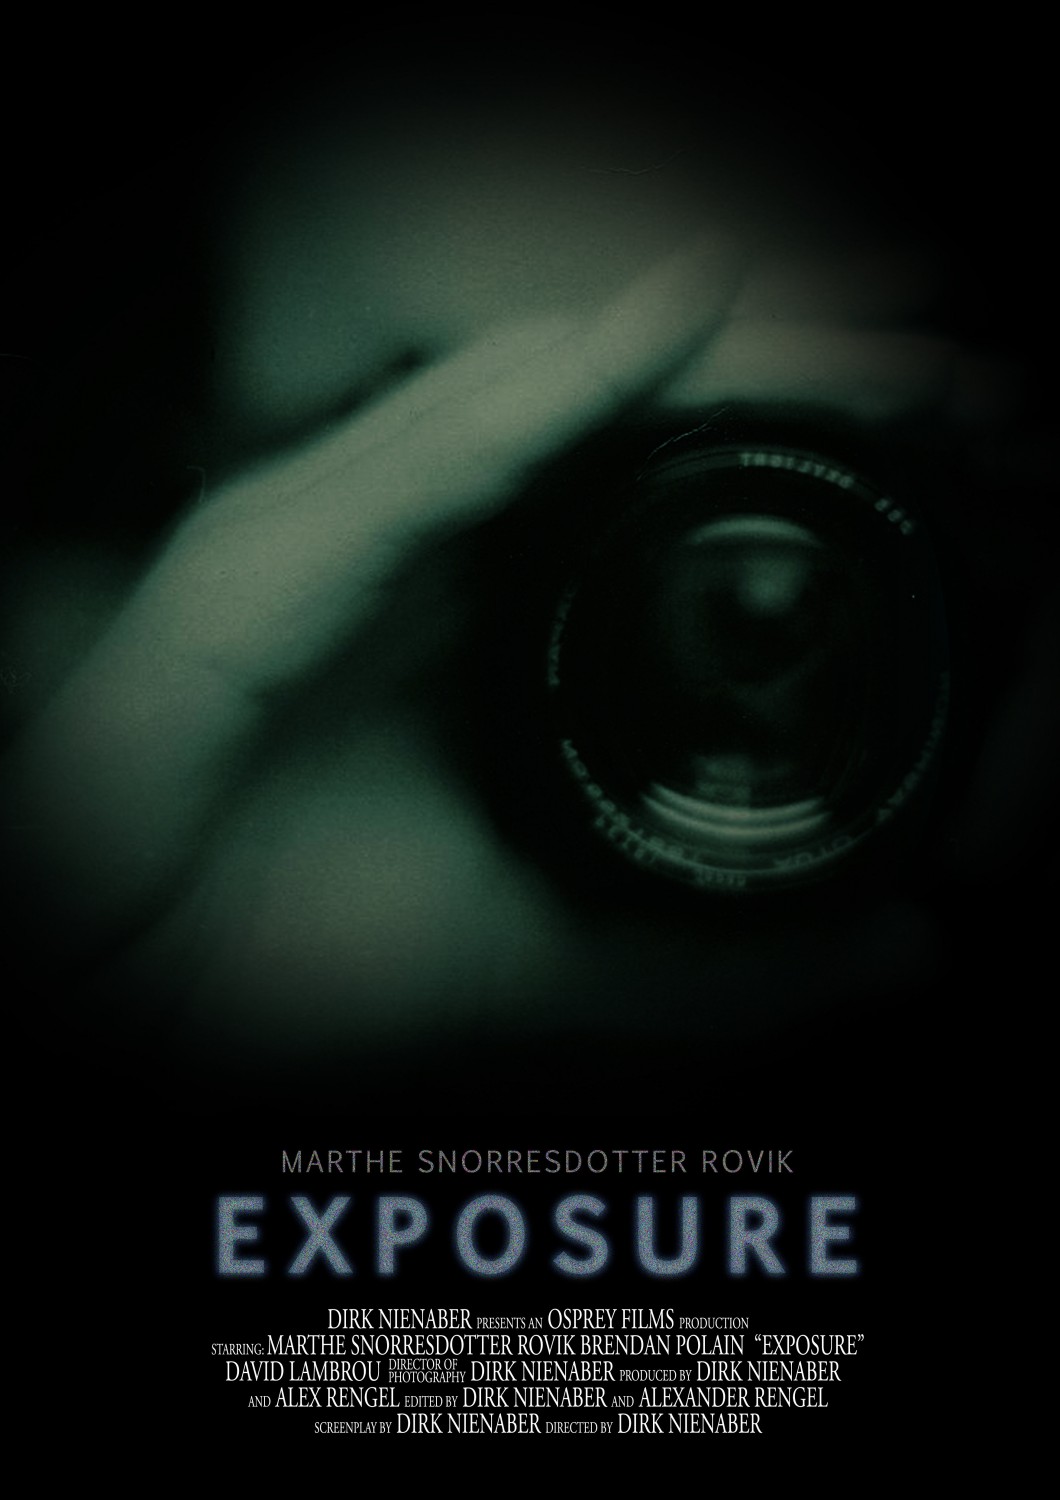 Extra Large Movie Poster Image for Exposure